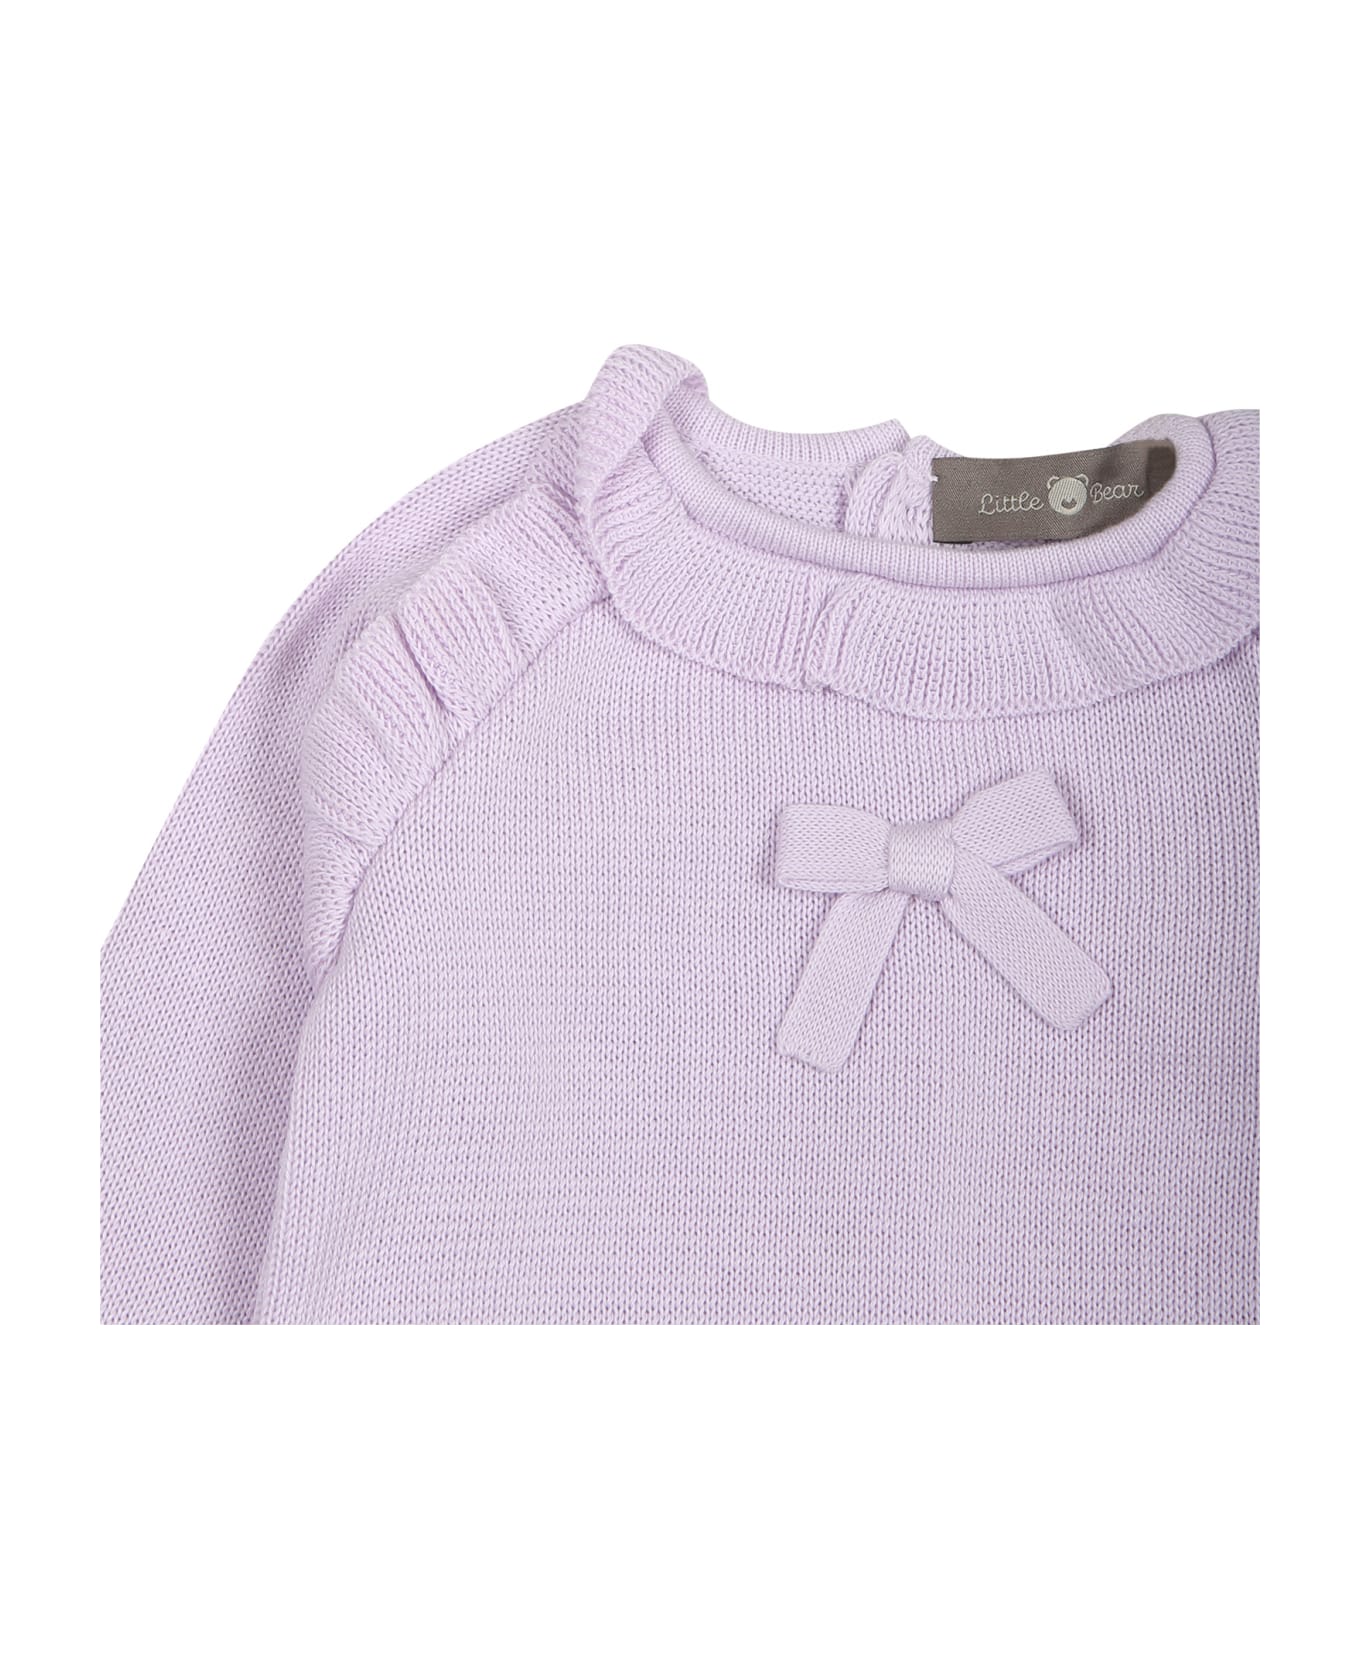 Little Bear Wisteria Birth Suit For Baby Girl - Violet